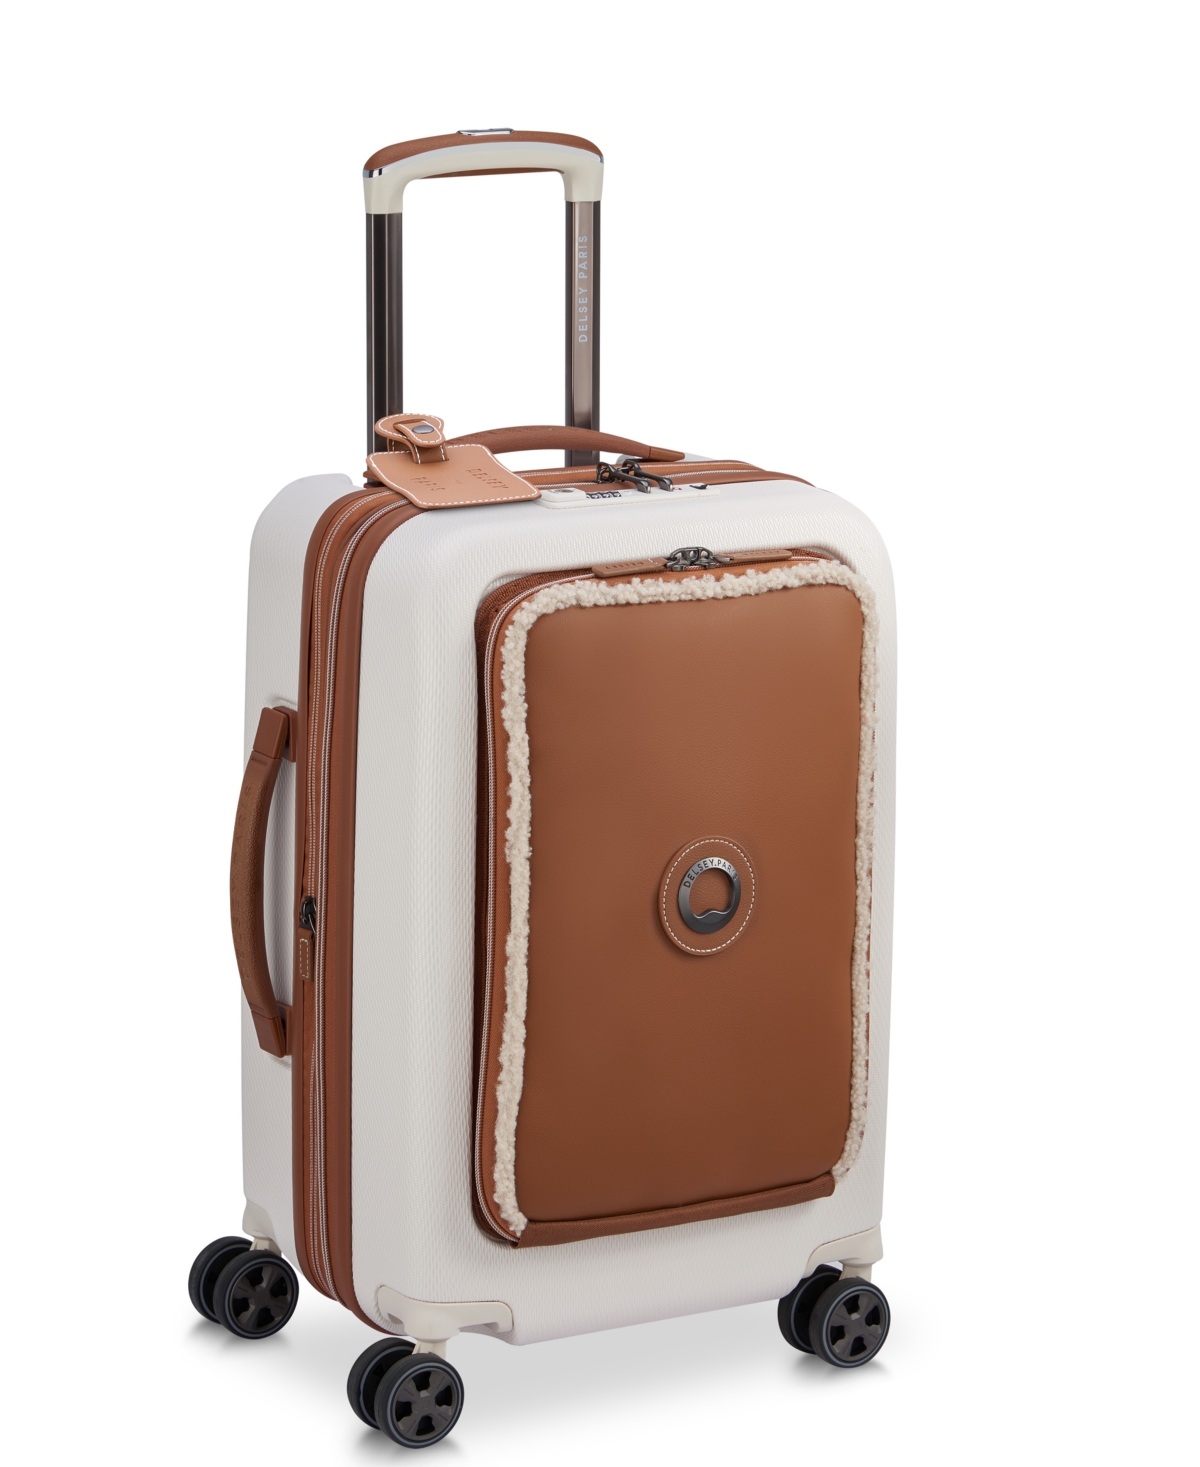 Delsey Chatelet Air 2.0 Fleece Pocket Carry-on In Angora